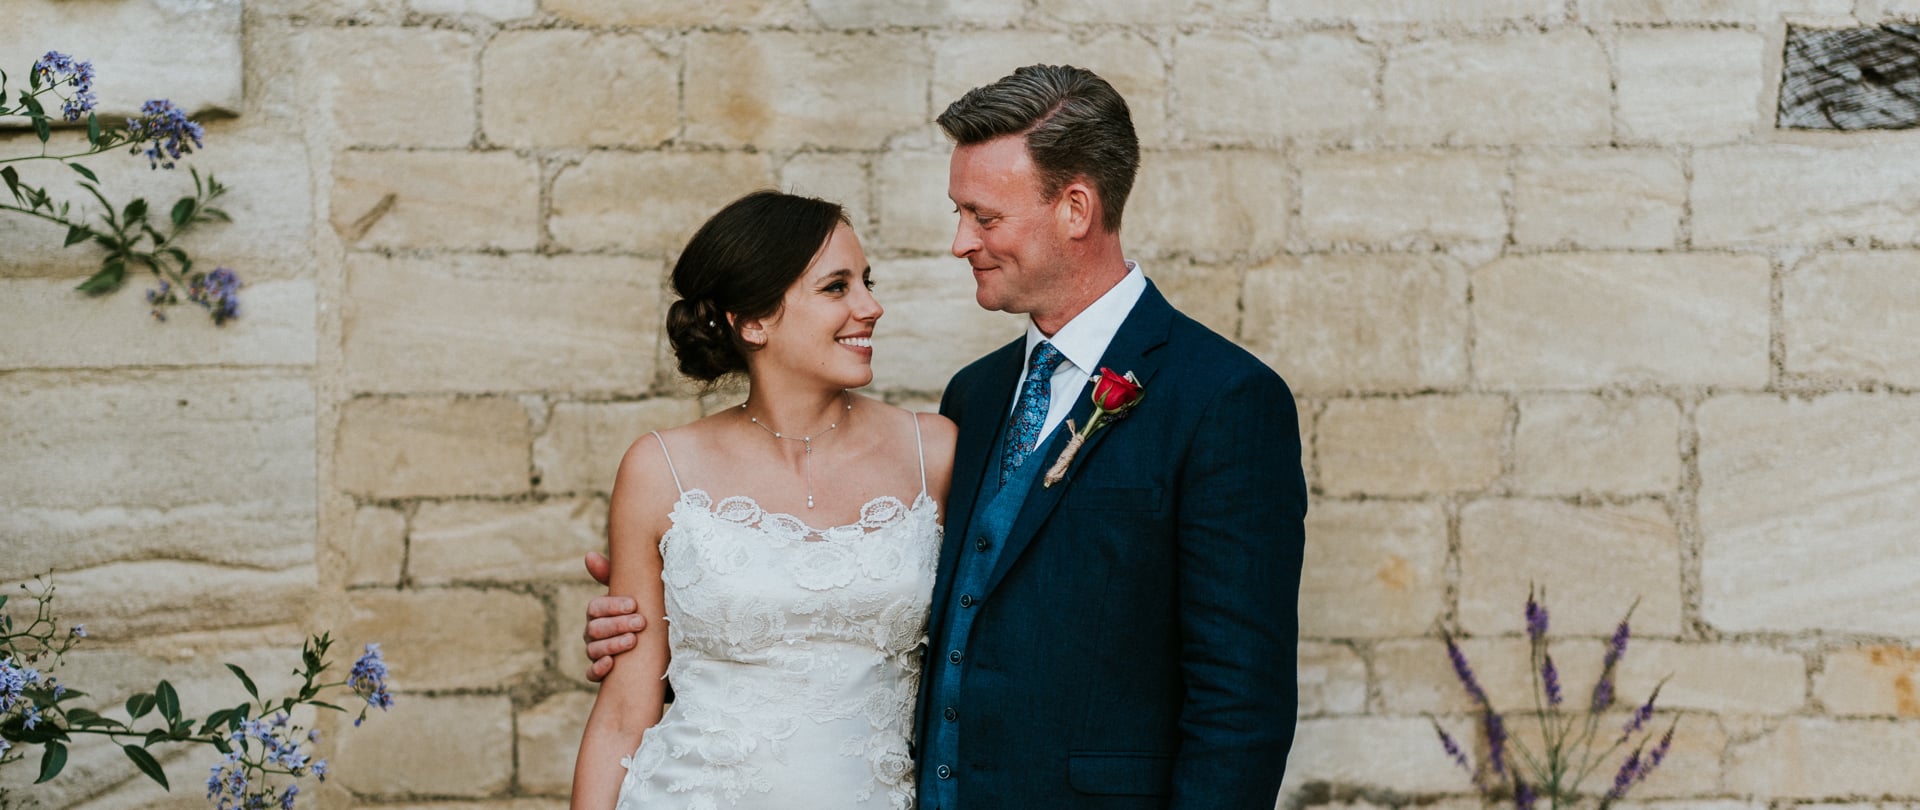 Milly & Richard Wedding Video Filmed at Wiltshire, England